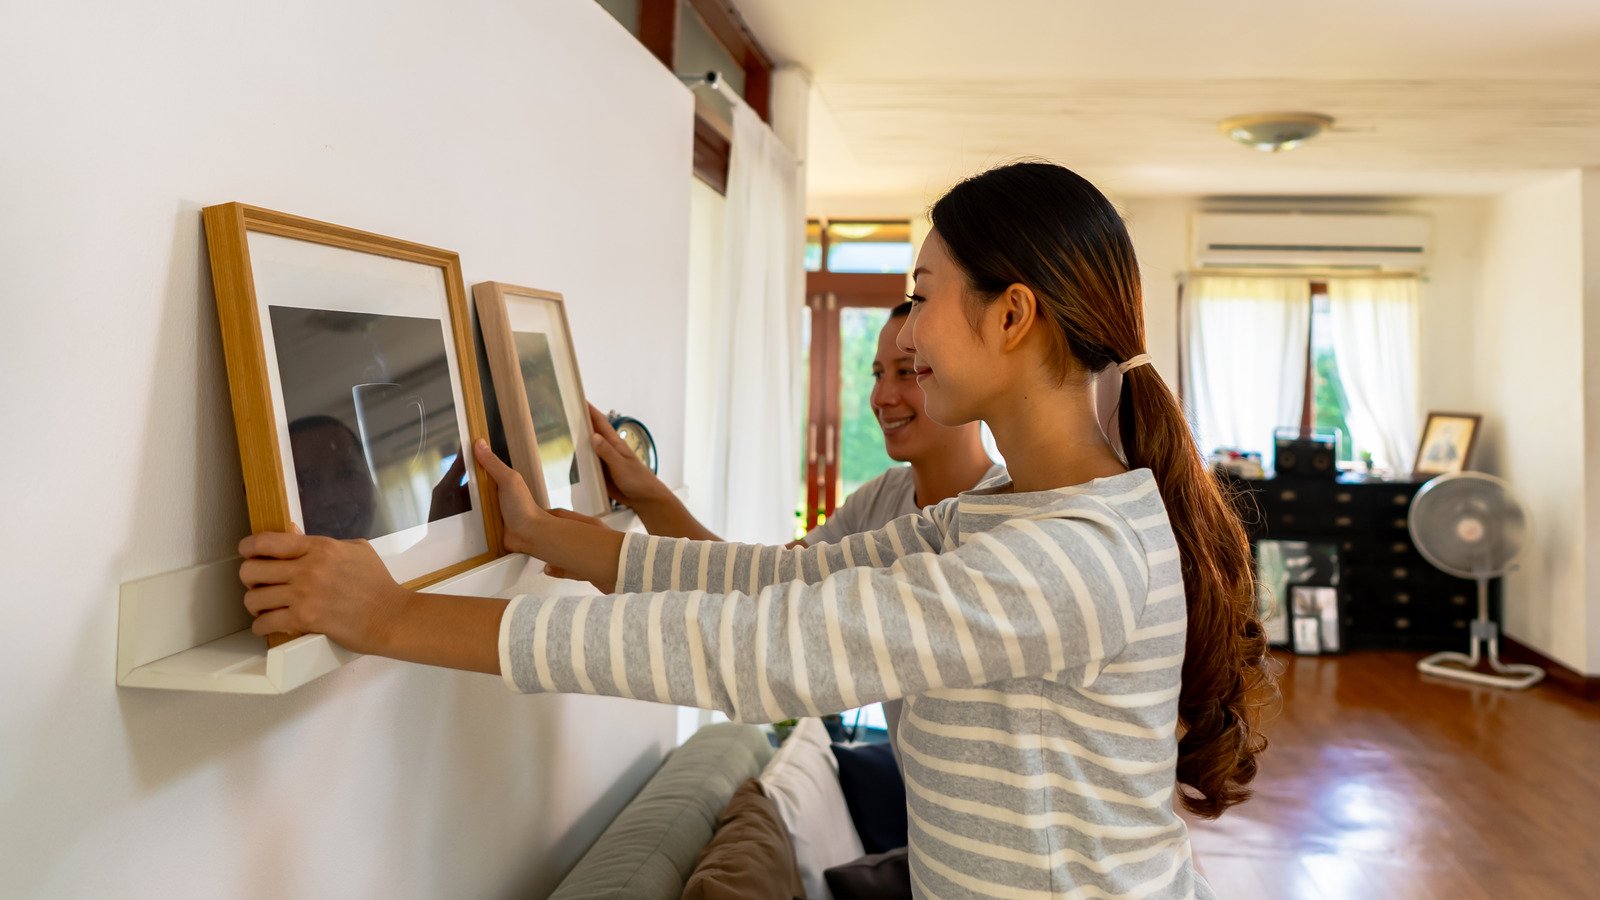 Common Mistakes People Make When Hanging Artwork On Their Walls - House Digest